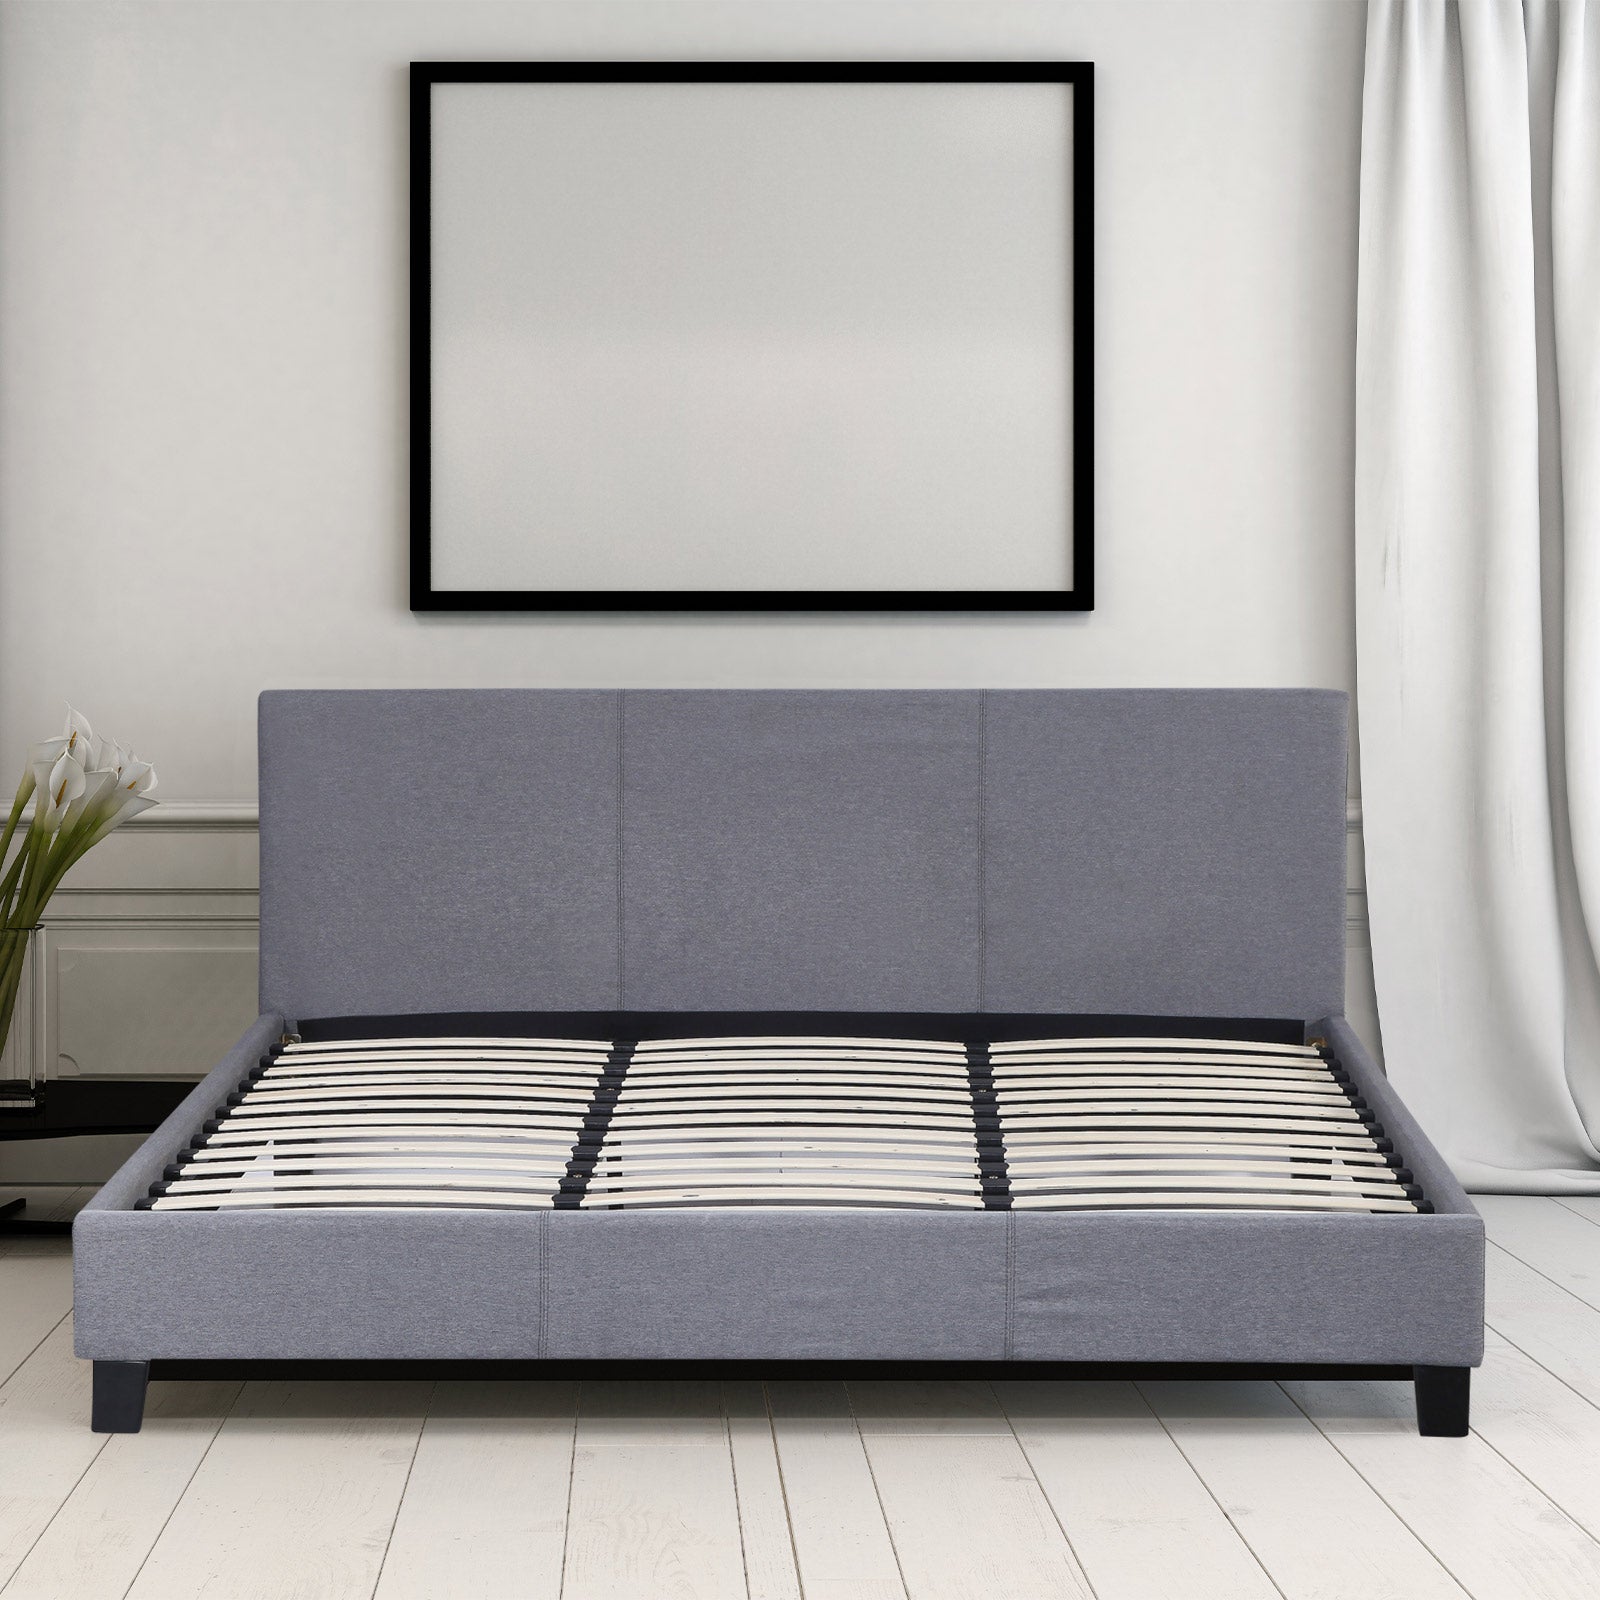 Milano Sienna Luxury Bed with Headboard (Model 2) - Grey No.28 - Double